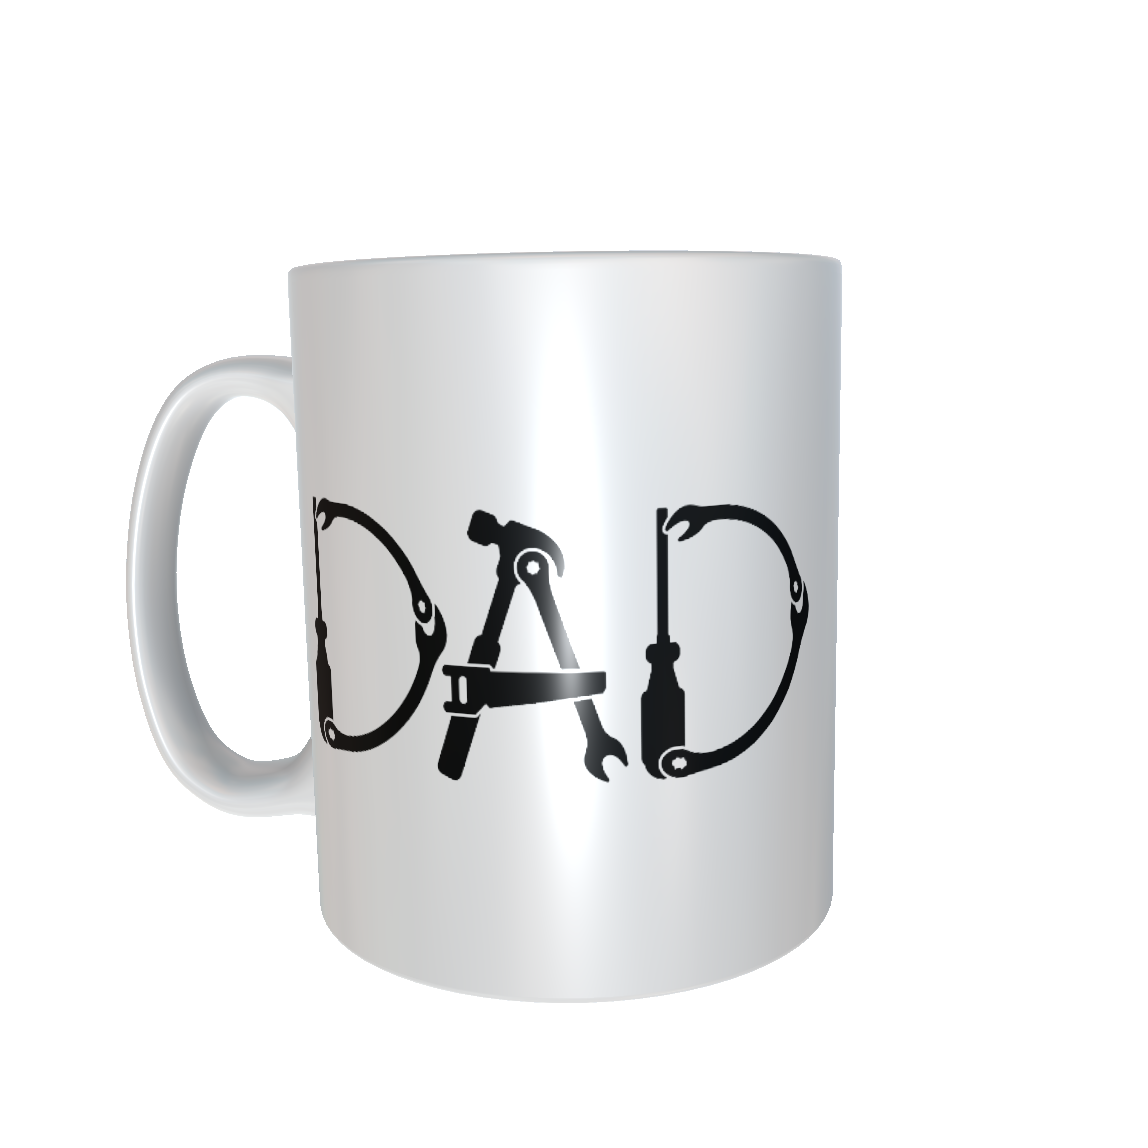 ustom Tumblers for Father's Day - Personalized Designs Just for Him